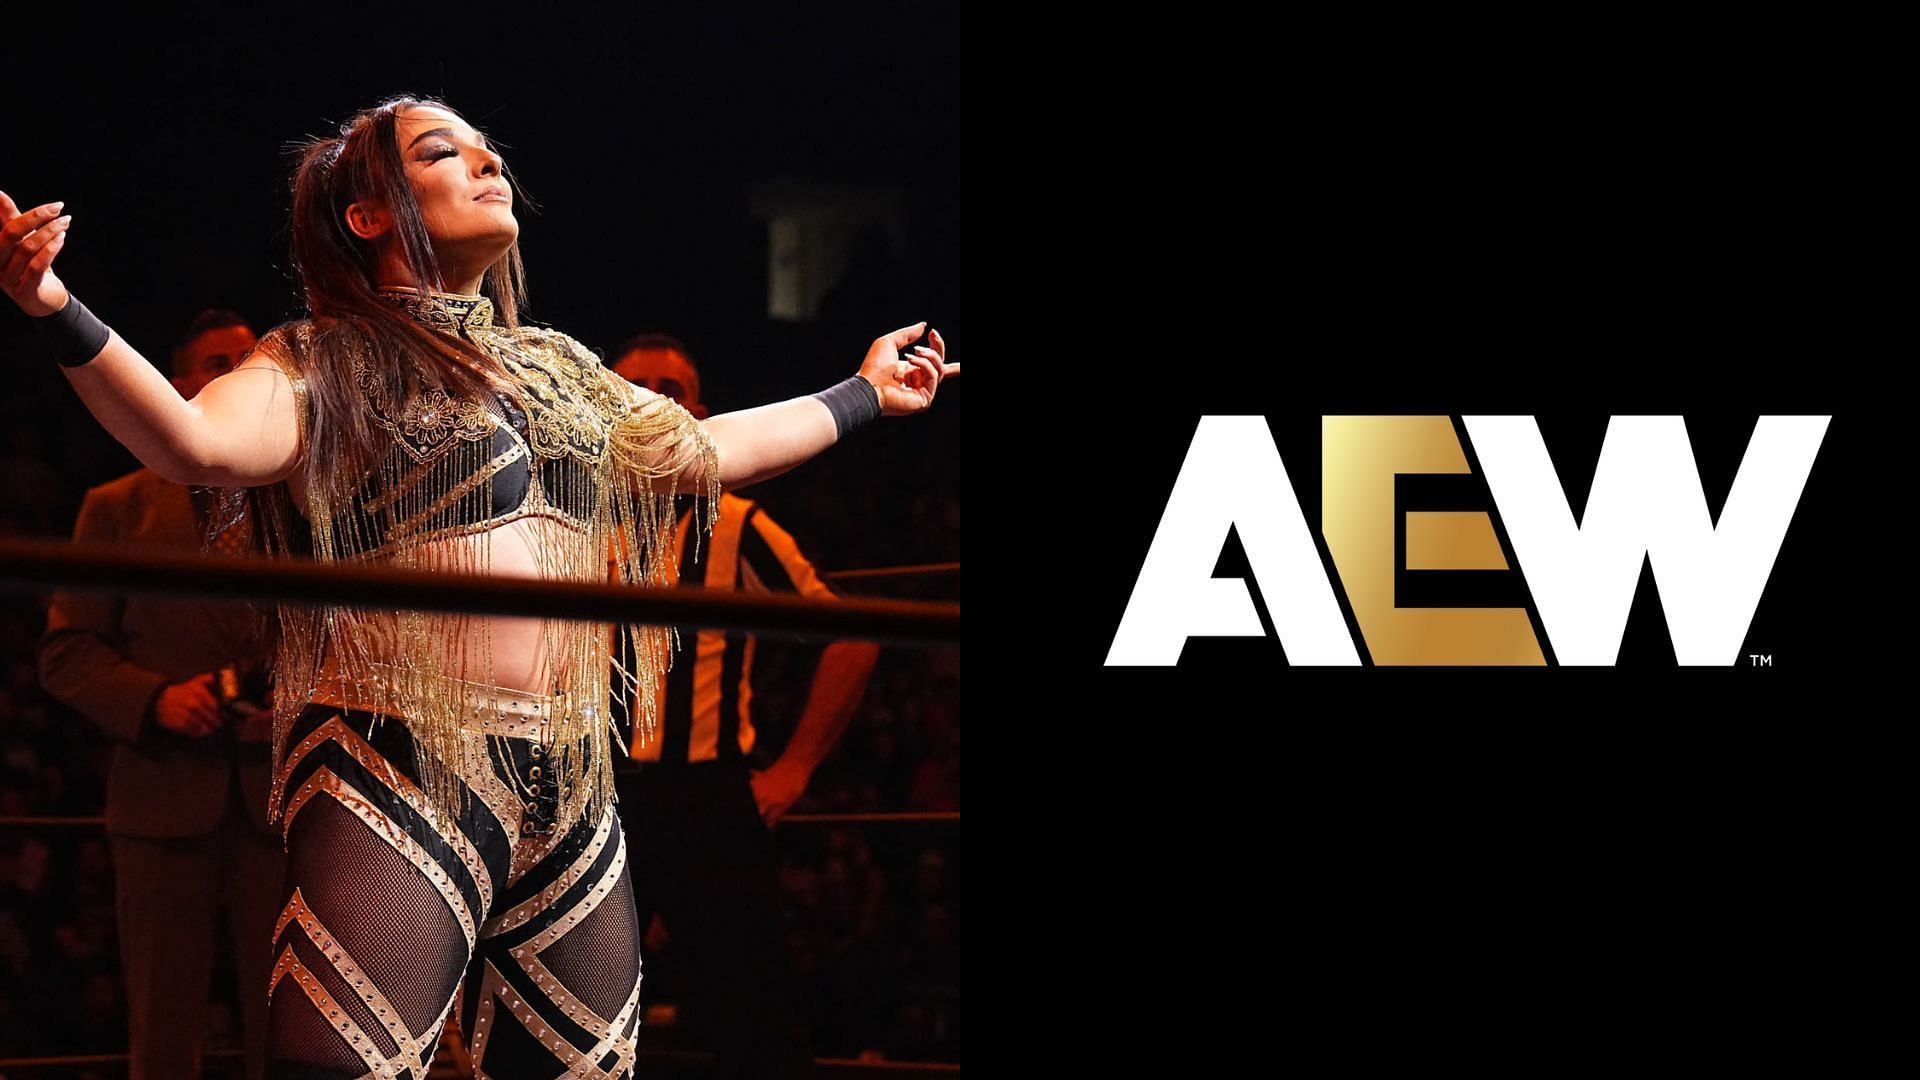 Deonna Purrazzo is one of AEW